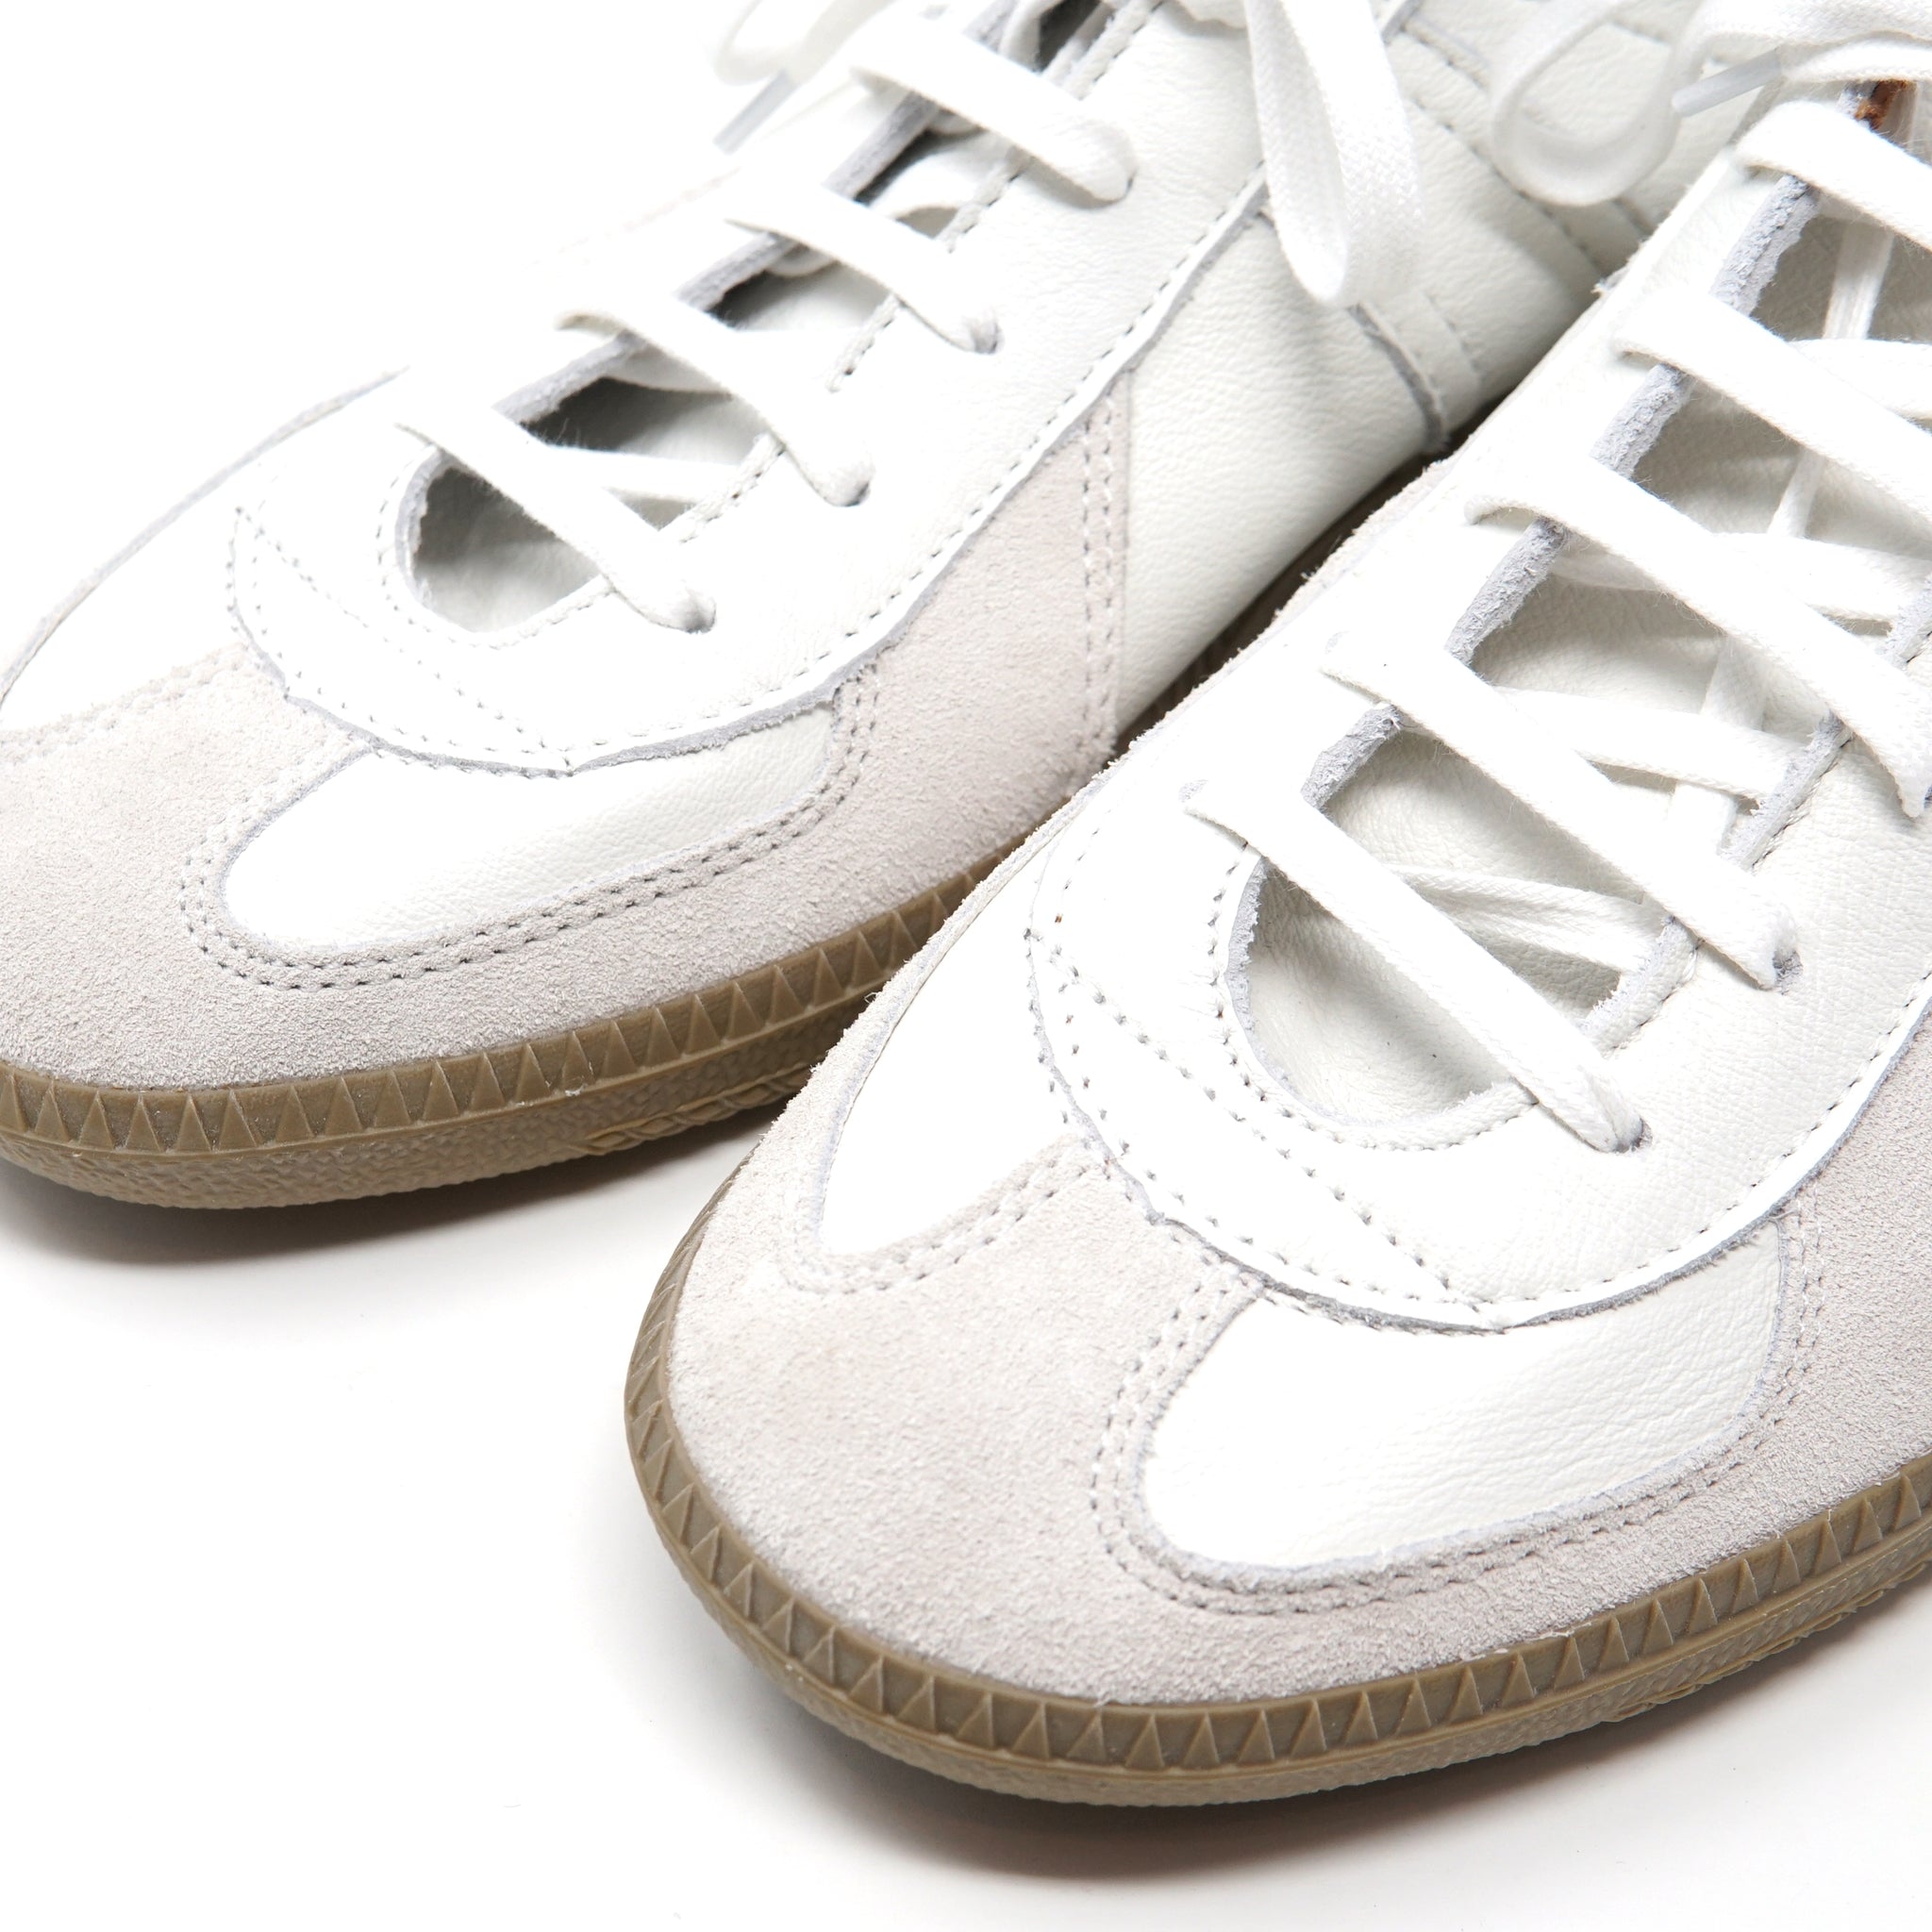 No:1700L_231-01 | Name:GERMAN MILITARY TRAINER | Color:White【REPRODUCTION OF FOUND_リプロダクションオブファウンド】